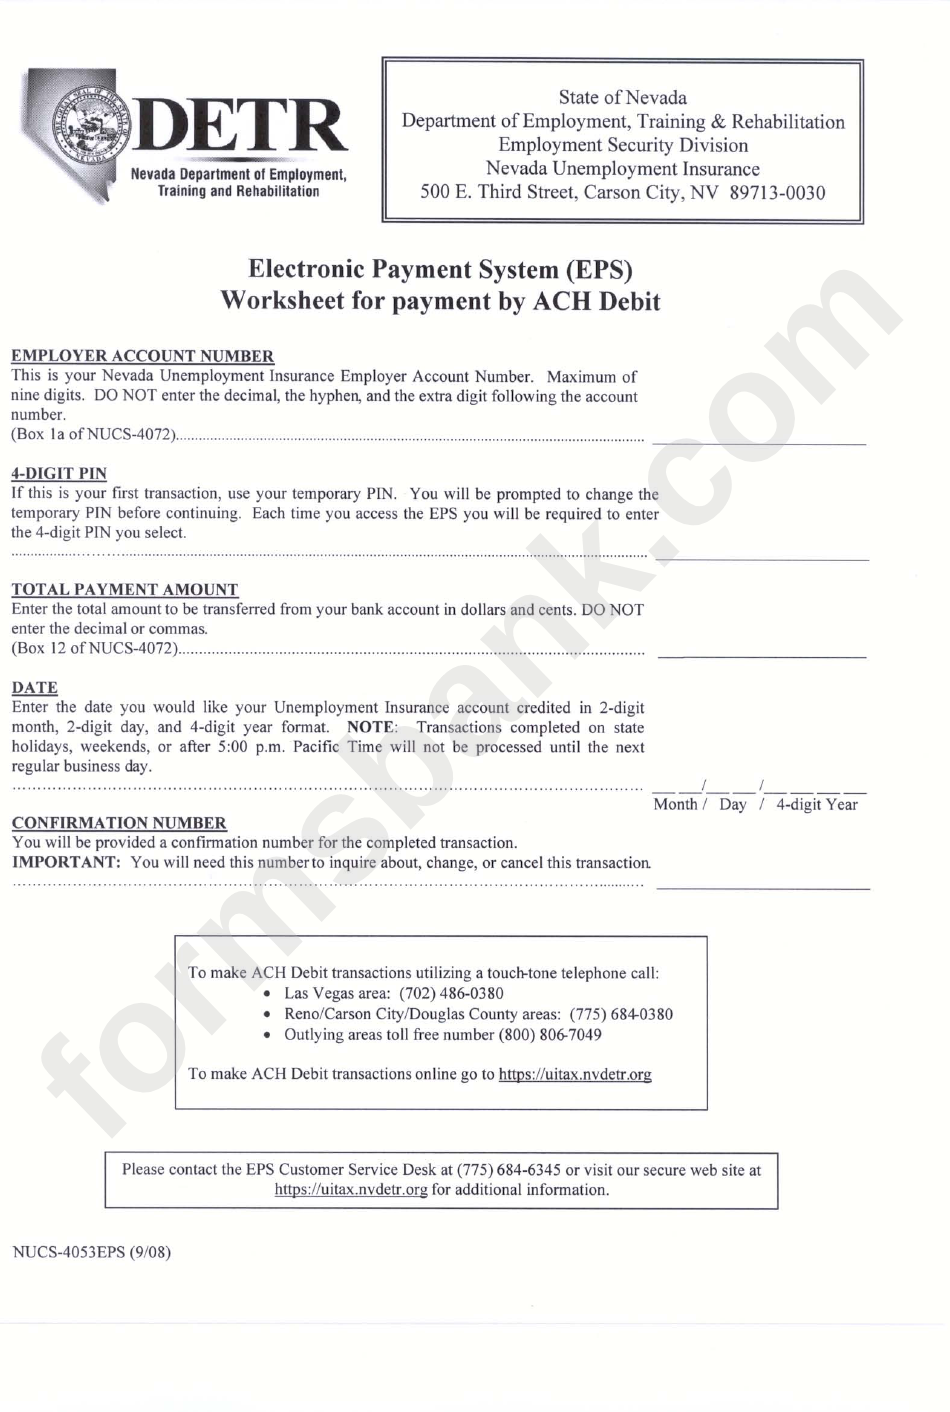 Form Nucs-4053eps - Electronic Payment System (Eps) Worksheet For Payment By Ach Debit - Nevada Department Of Employment, Training & Rehabilitation